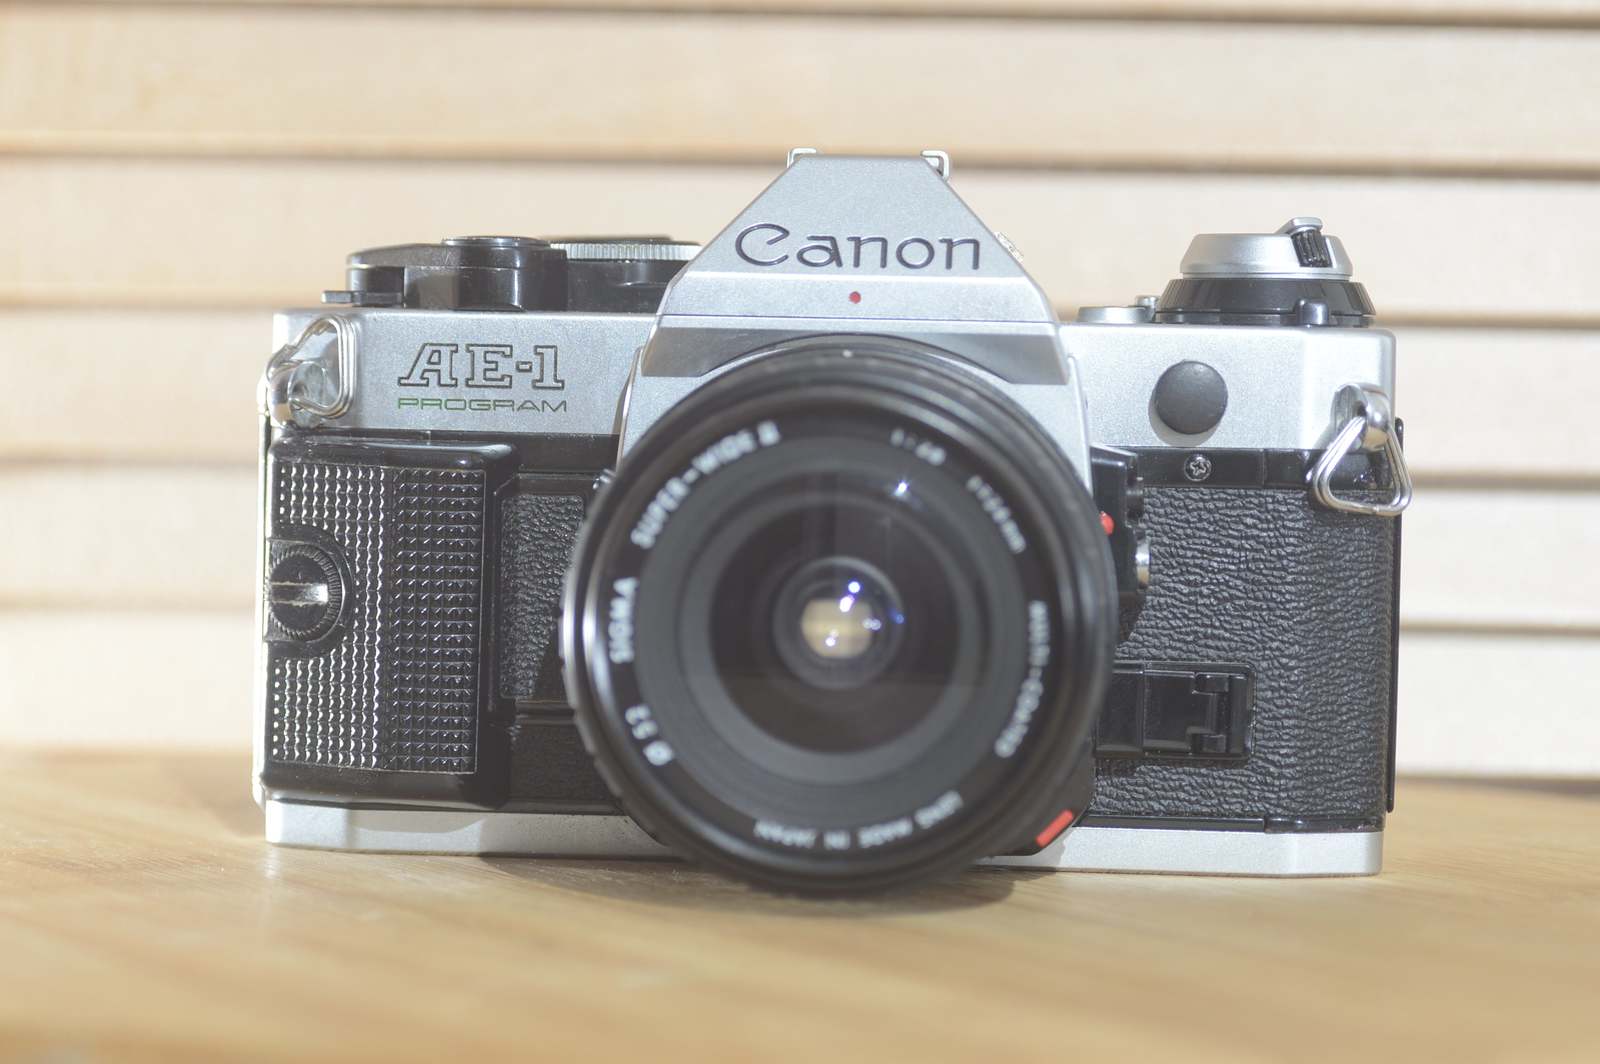 Canon AE1 P with Sigma Super wide 2 24mm f2.8 FD lens! Beautiful example of a we - $430.00 - $440.00